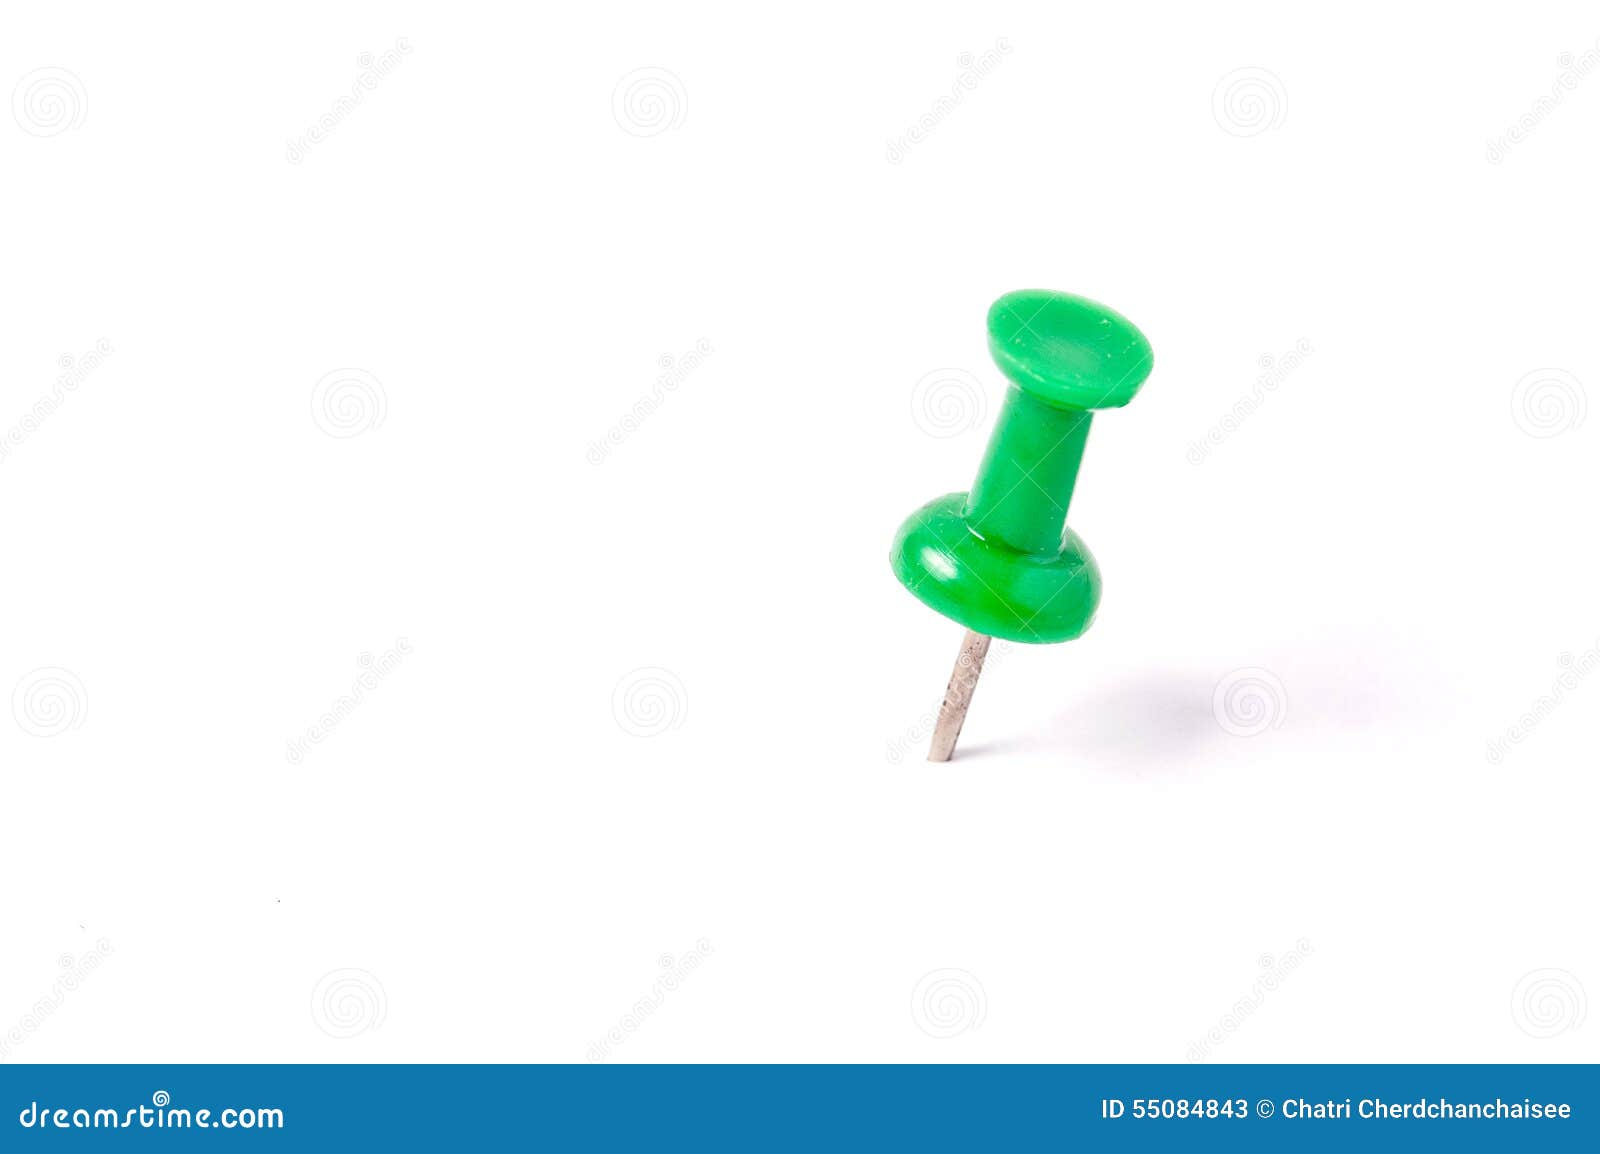 Close Up of a Green Pushpin on White Background Stock Image - Image of ...